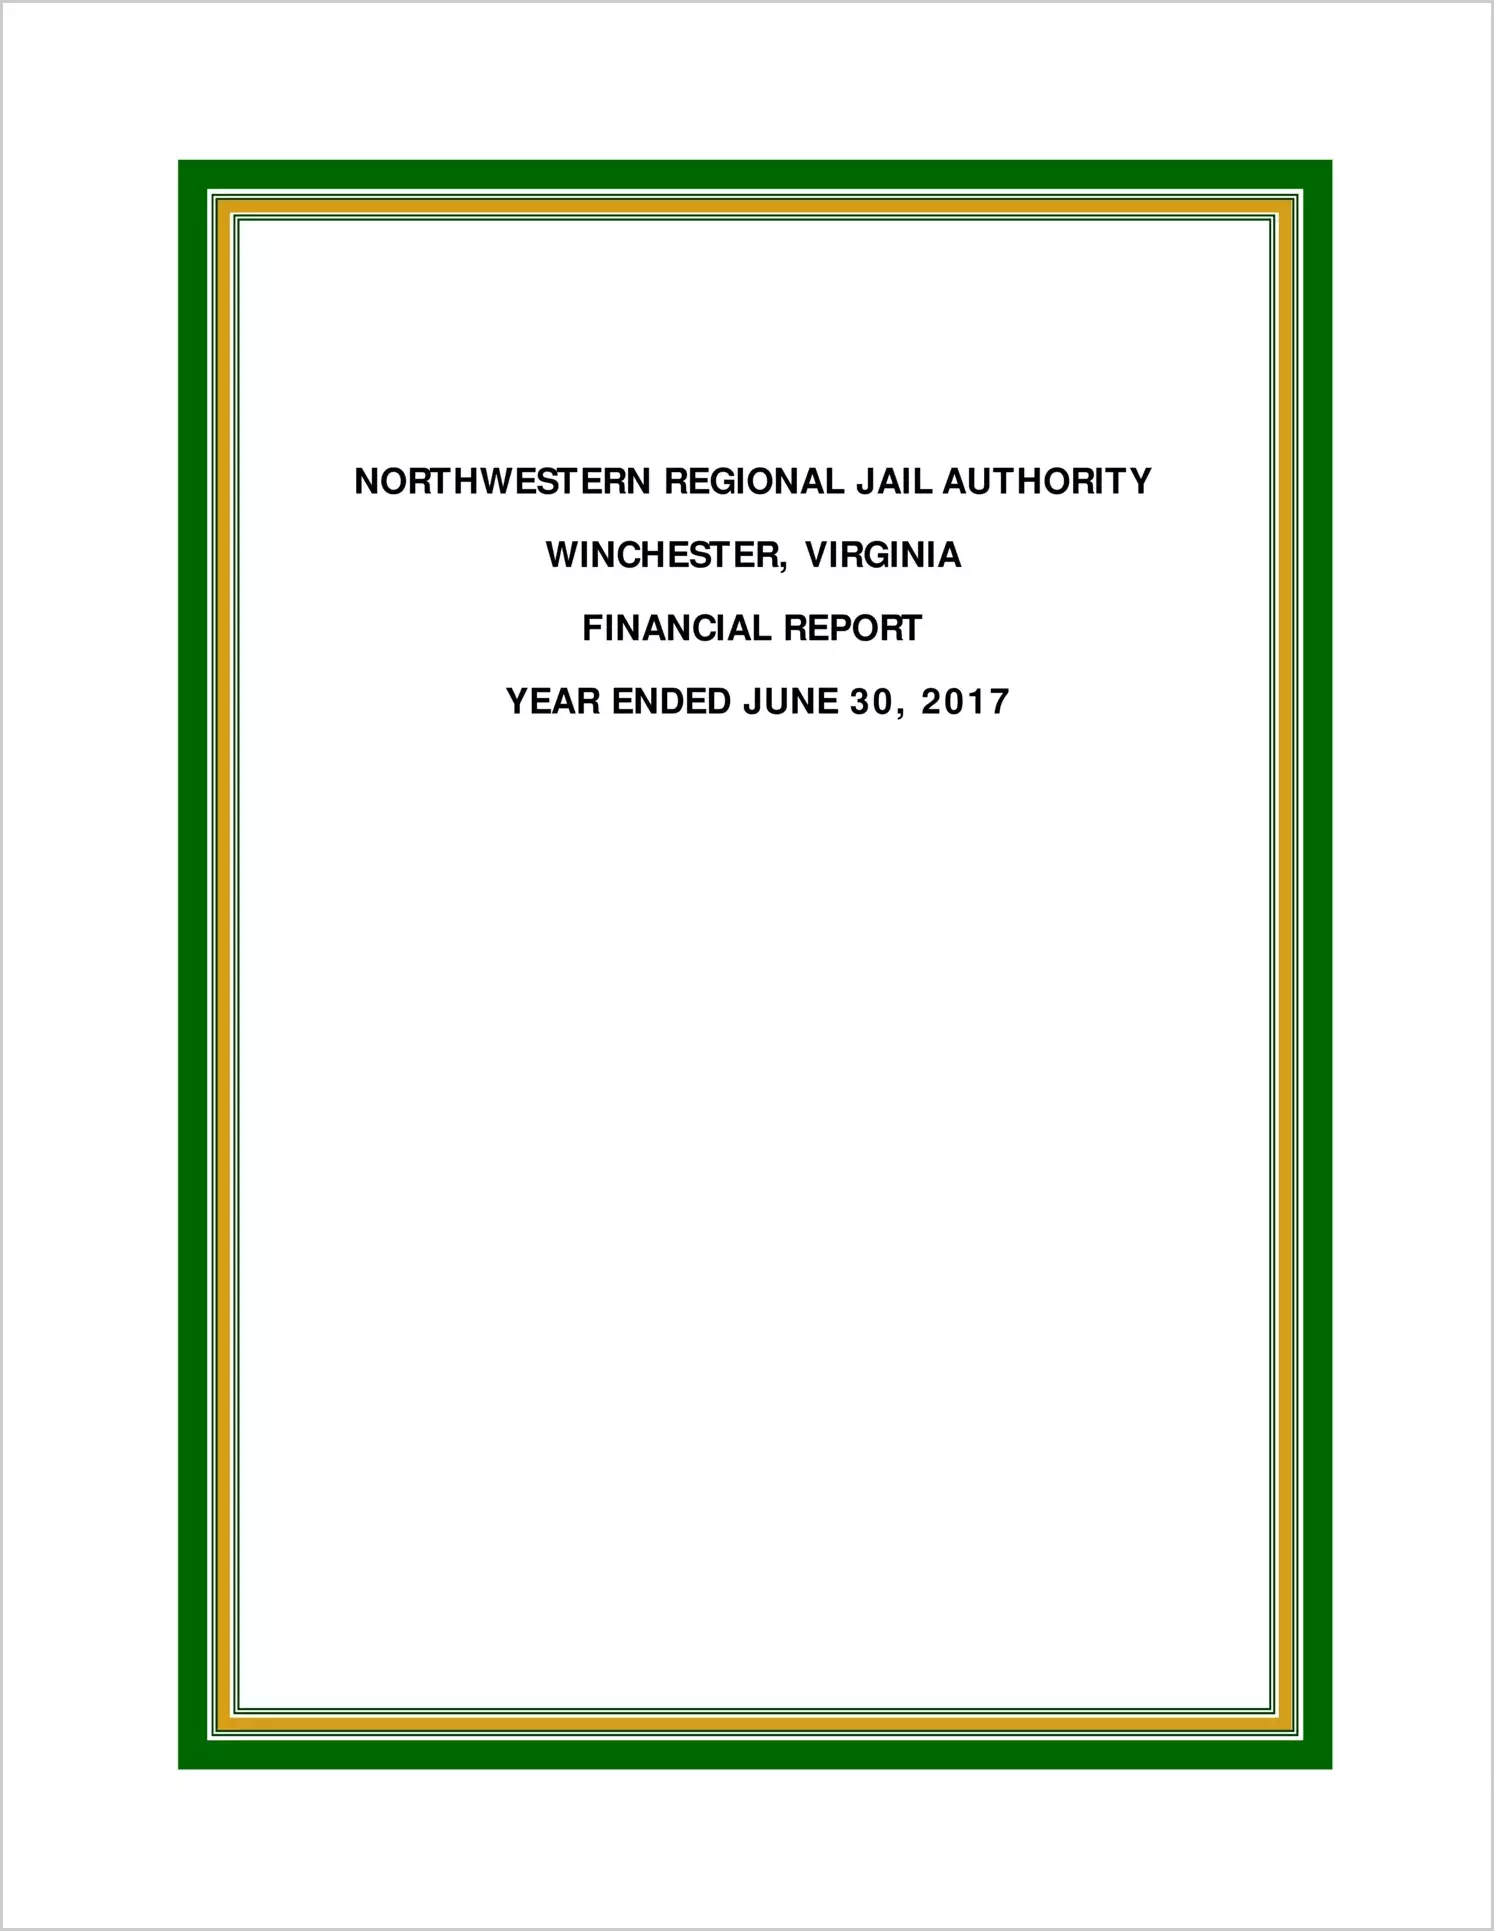 2017 ABC/Other Annual Financial Report  for Northwestern Regional Jail Authority